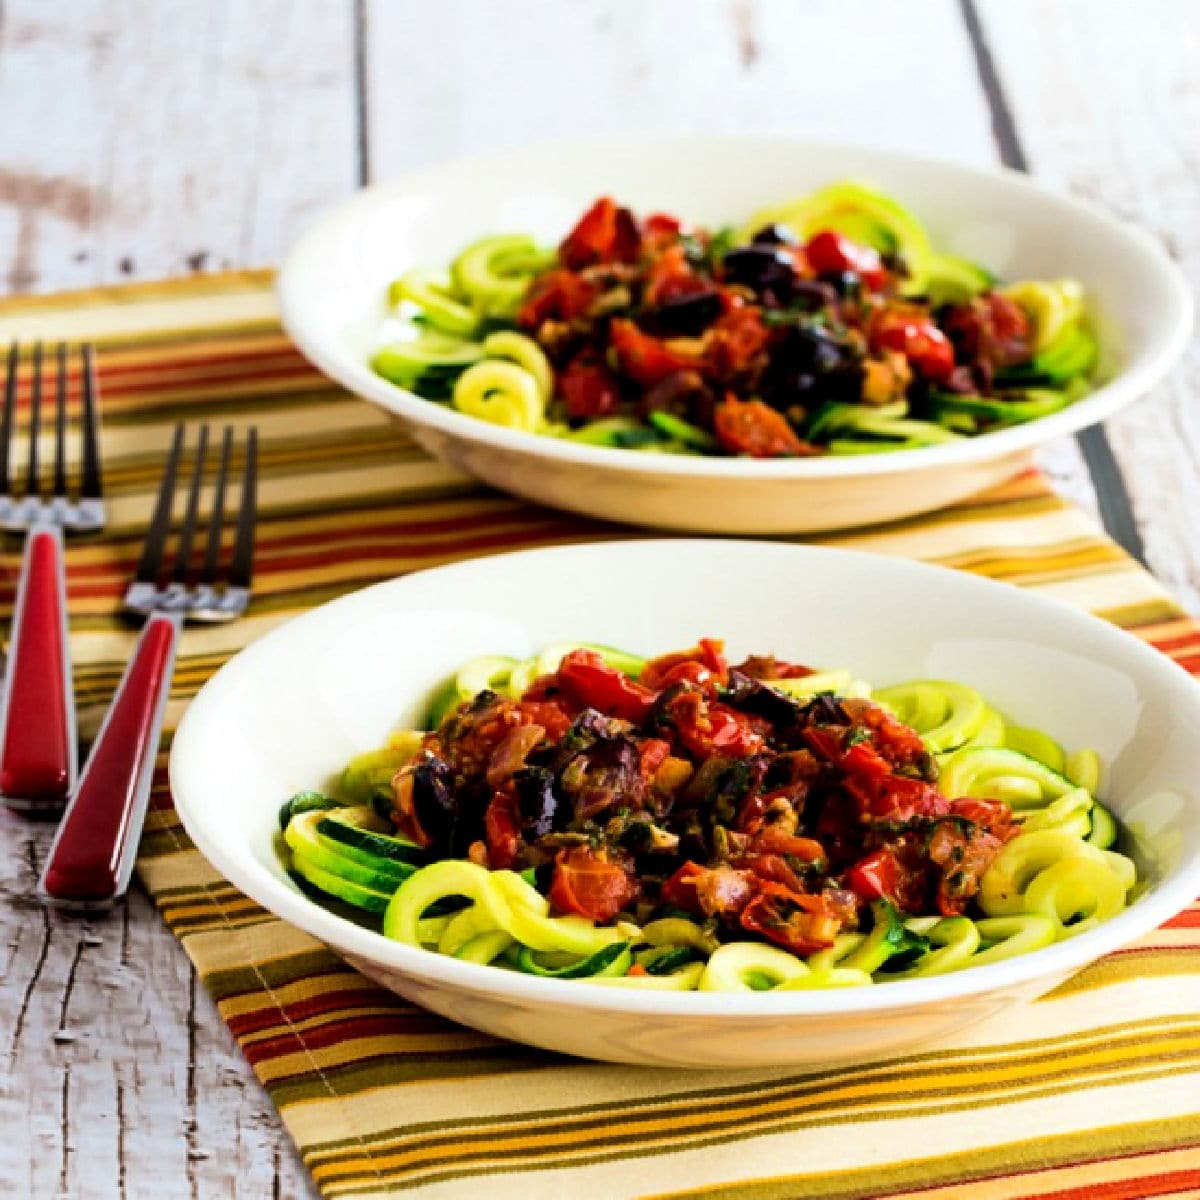 Square image for Mediterranean Zucchini Noodles shown in two bowls with forks on striped napkin.